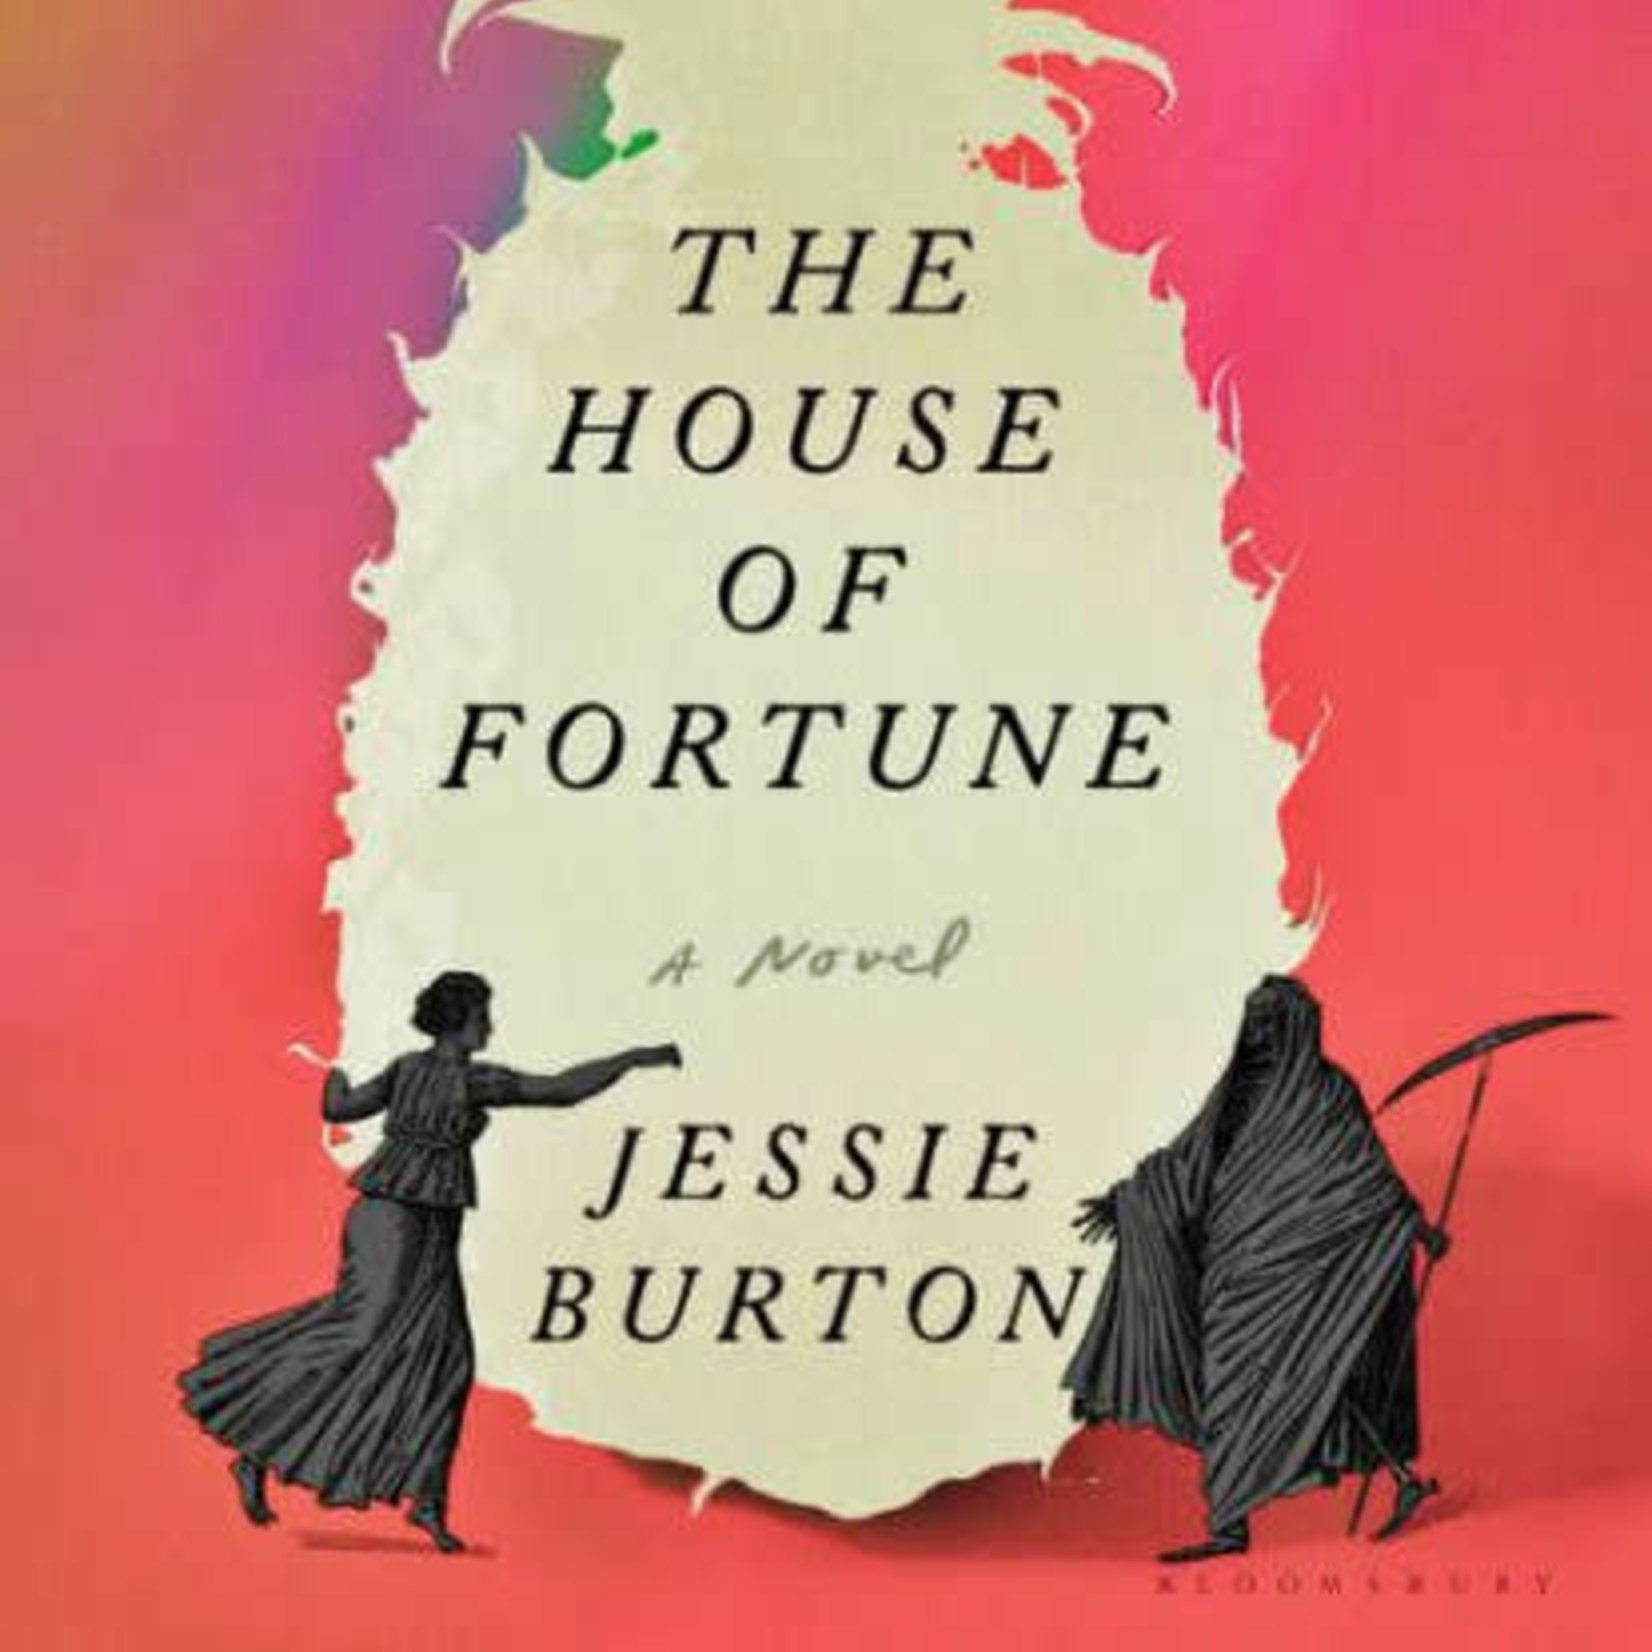 THE HOUSE OF FORTUNE